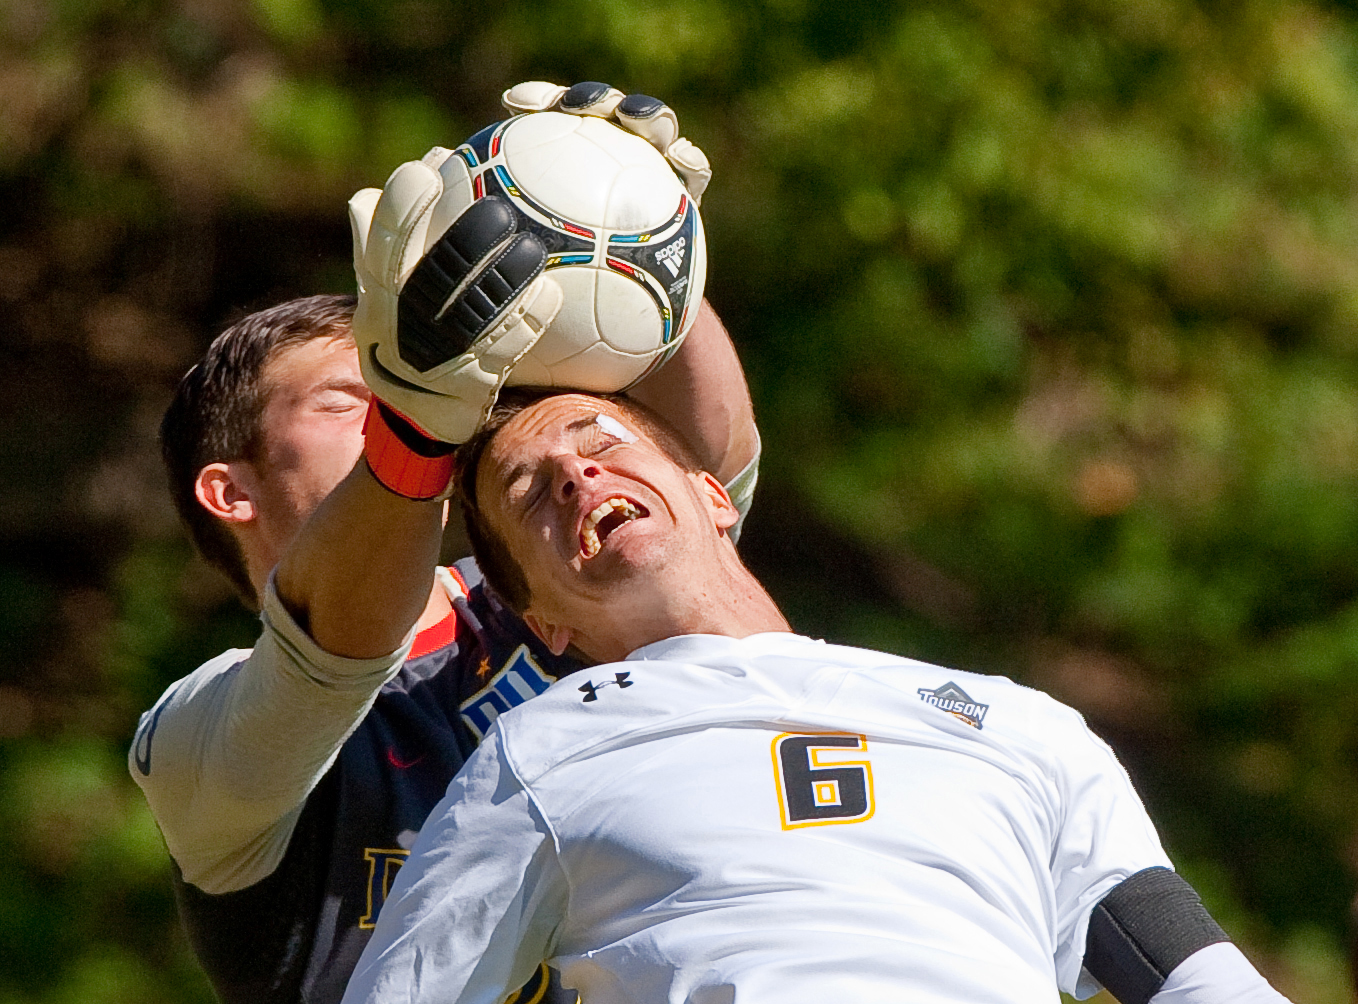  Towson University men's soccer defenseman, Daniel Grundei, attempts to take the game into overtime with a diving header on Oct. 13, 2012 in Baltimore, Md.  